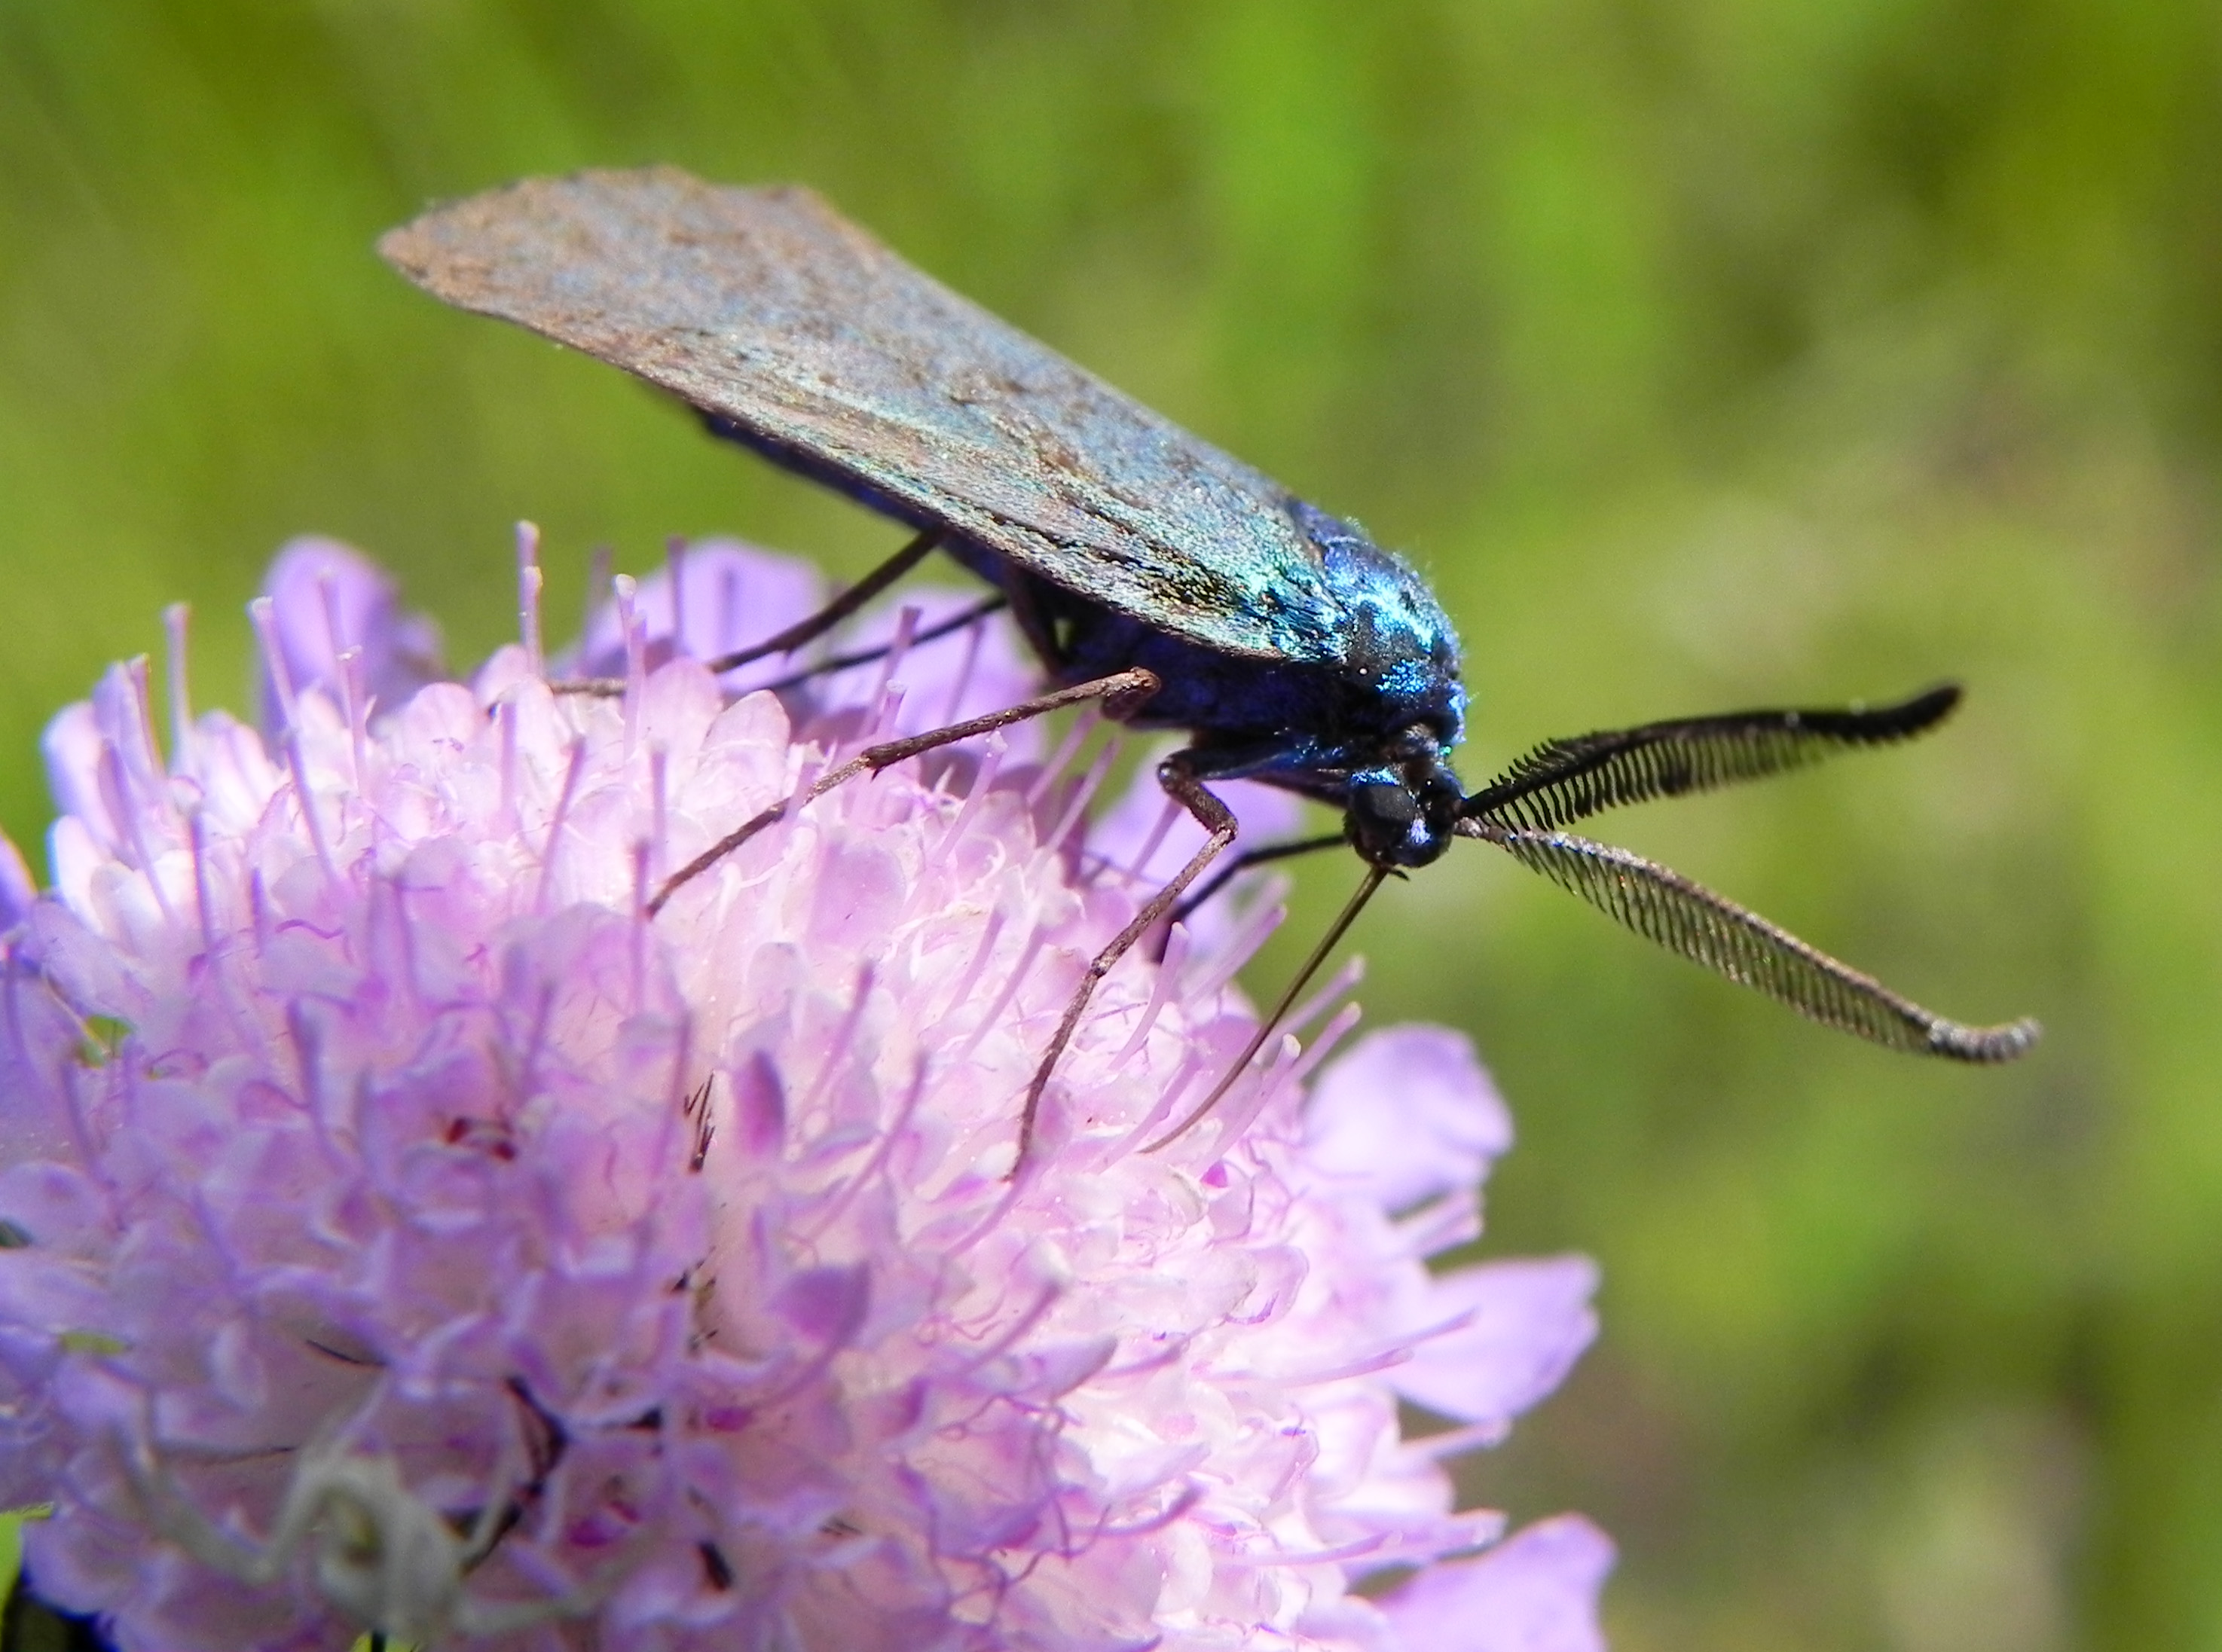 fam. Zygaenidae. Italia, Garda Lakes Pre Alps, 5 Jul 2014, Provided by Paolo for didactics, but not shot with children.